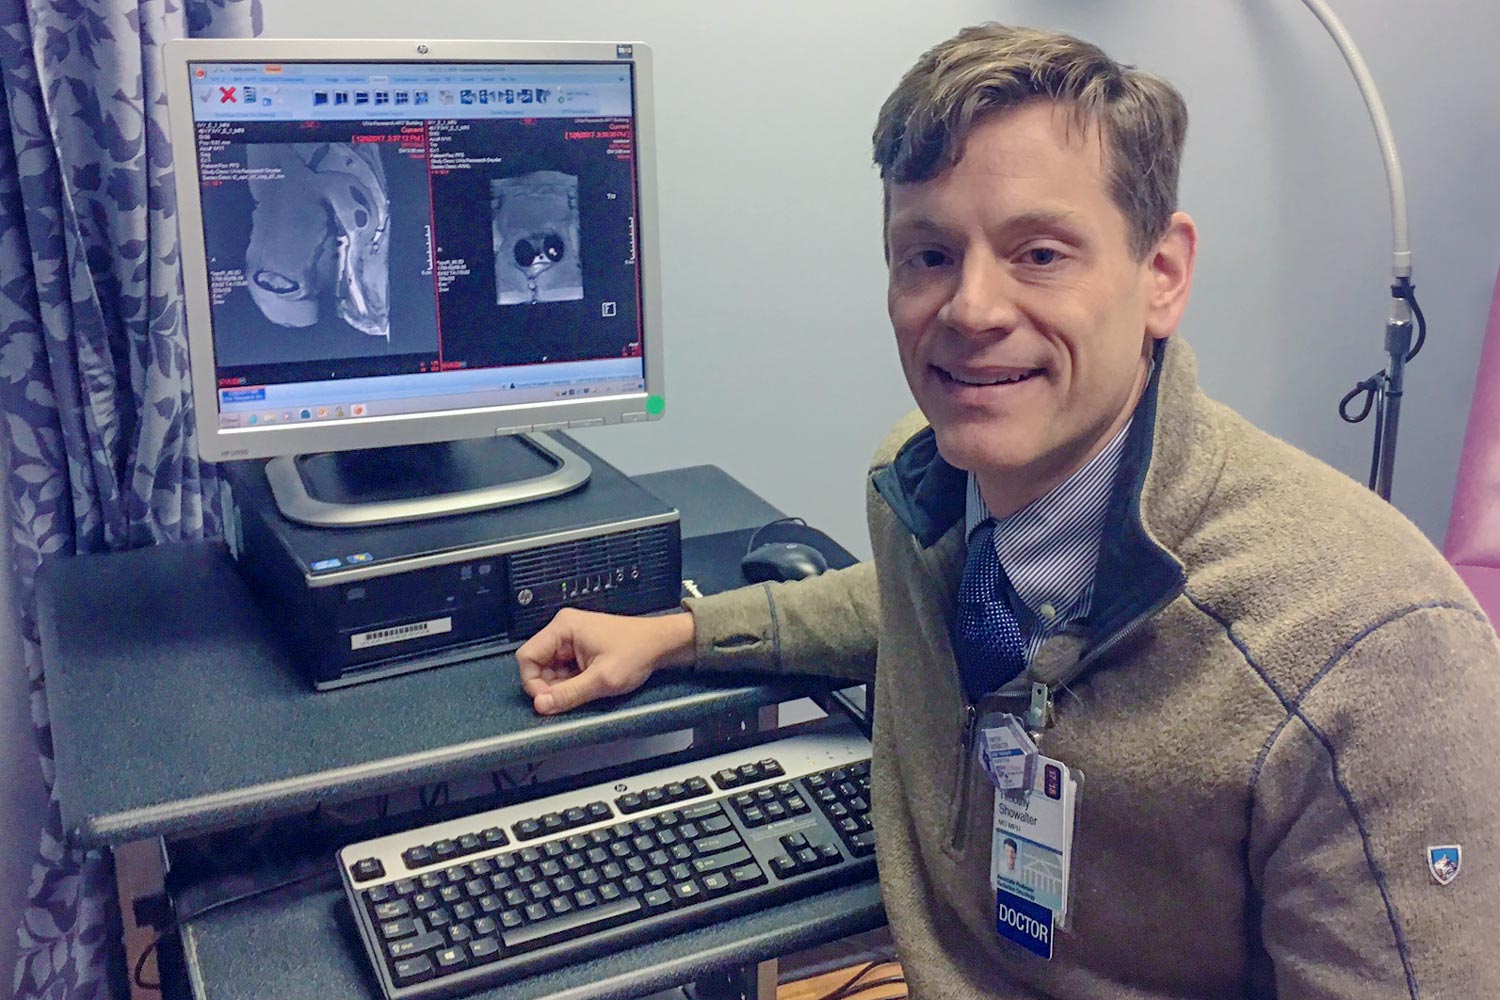 Dr. Timothy Showalter sits in front of a camera with a body scan images on the screen